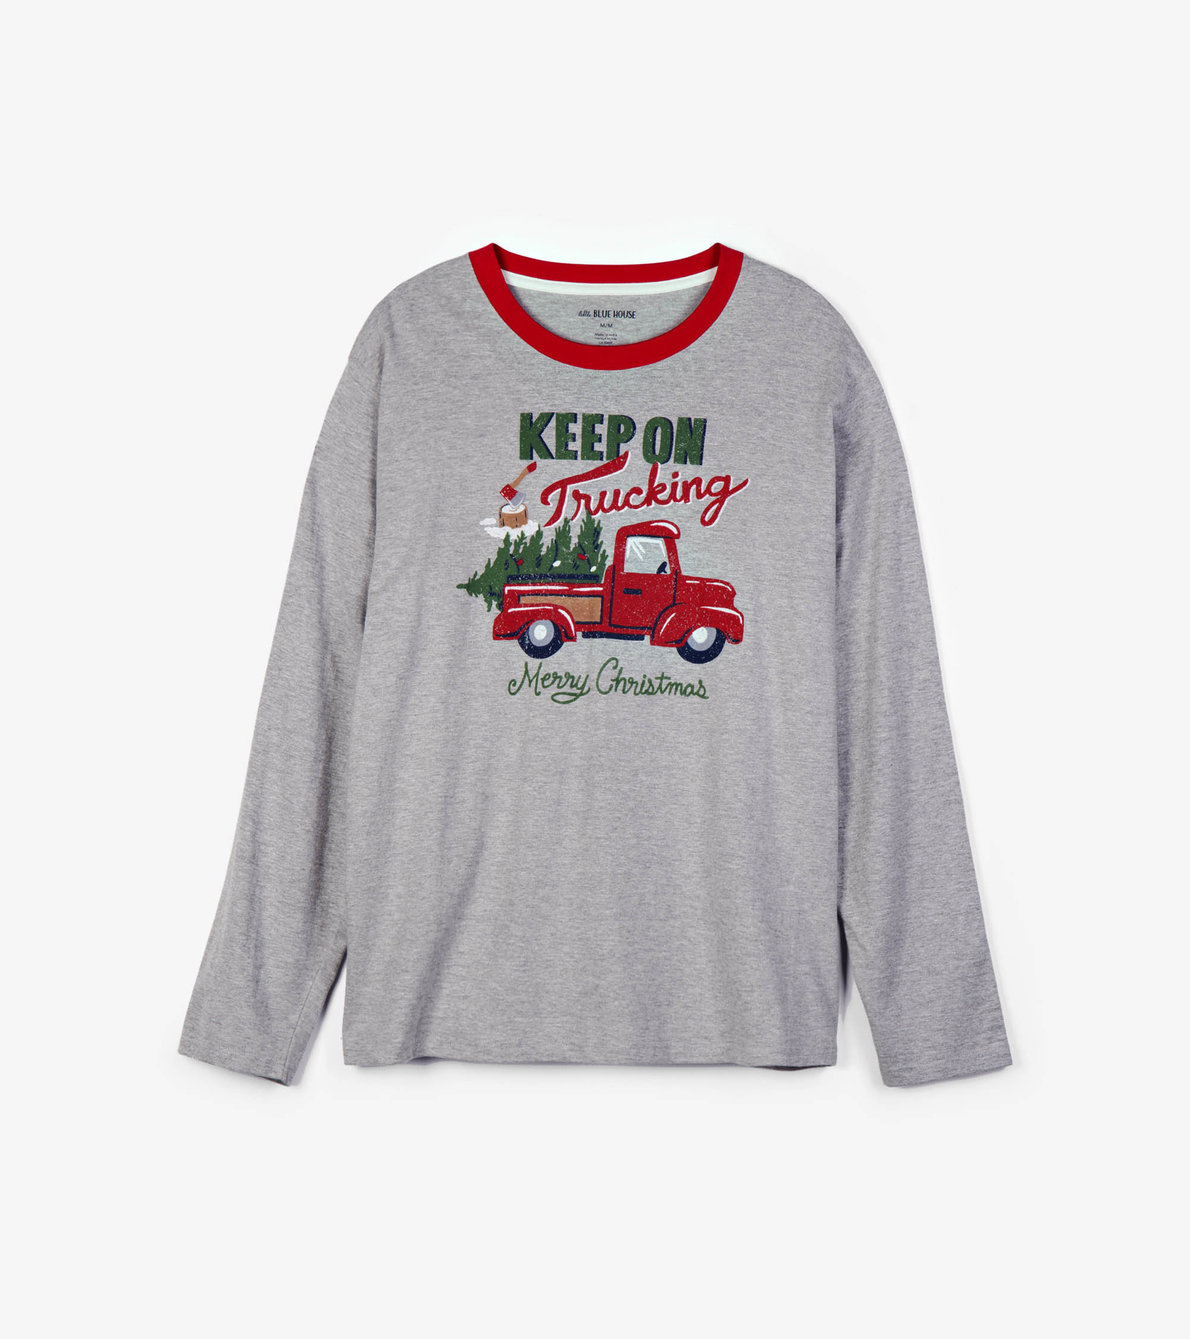 View larger image of Keep on Trucking Men's Long Sleeve Tee